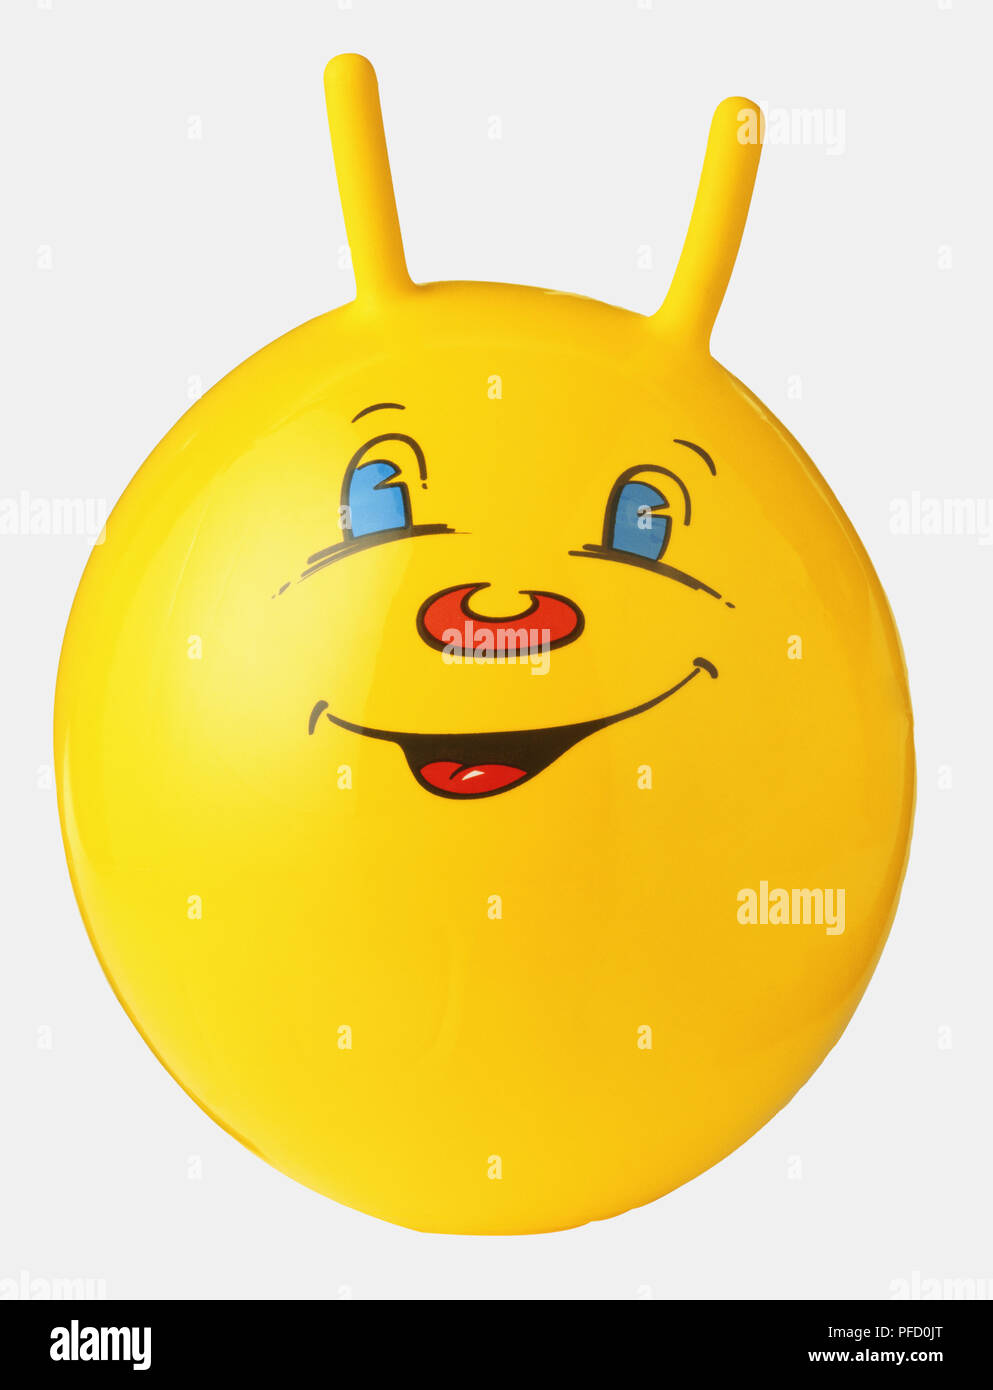 1950 space hopper, yellow with smiley face printed in front. Stock Photo